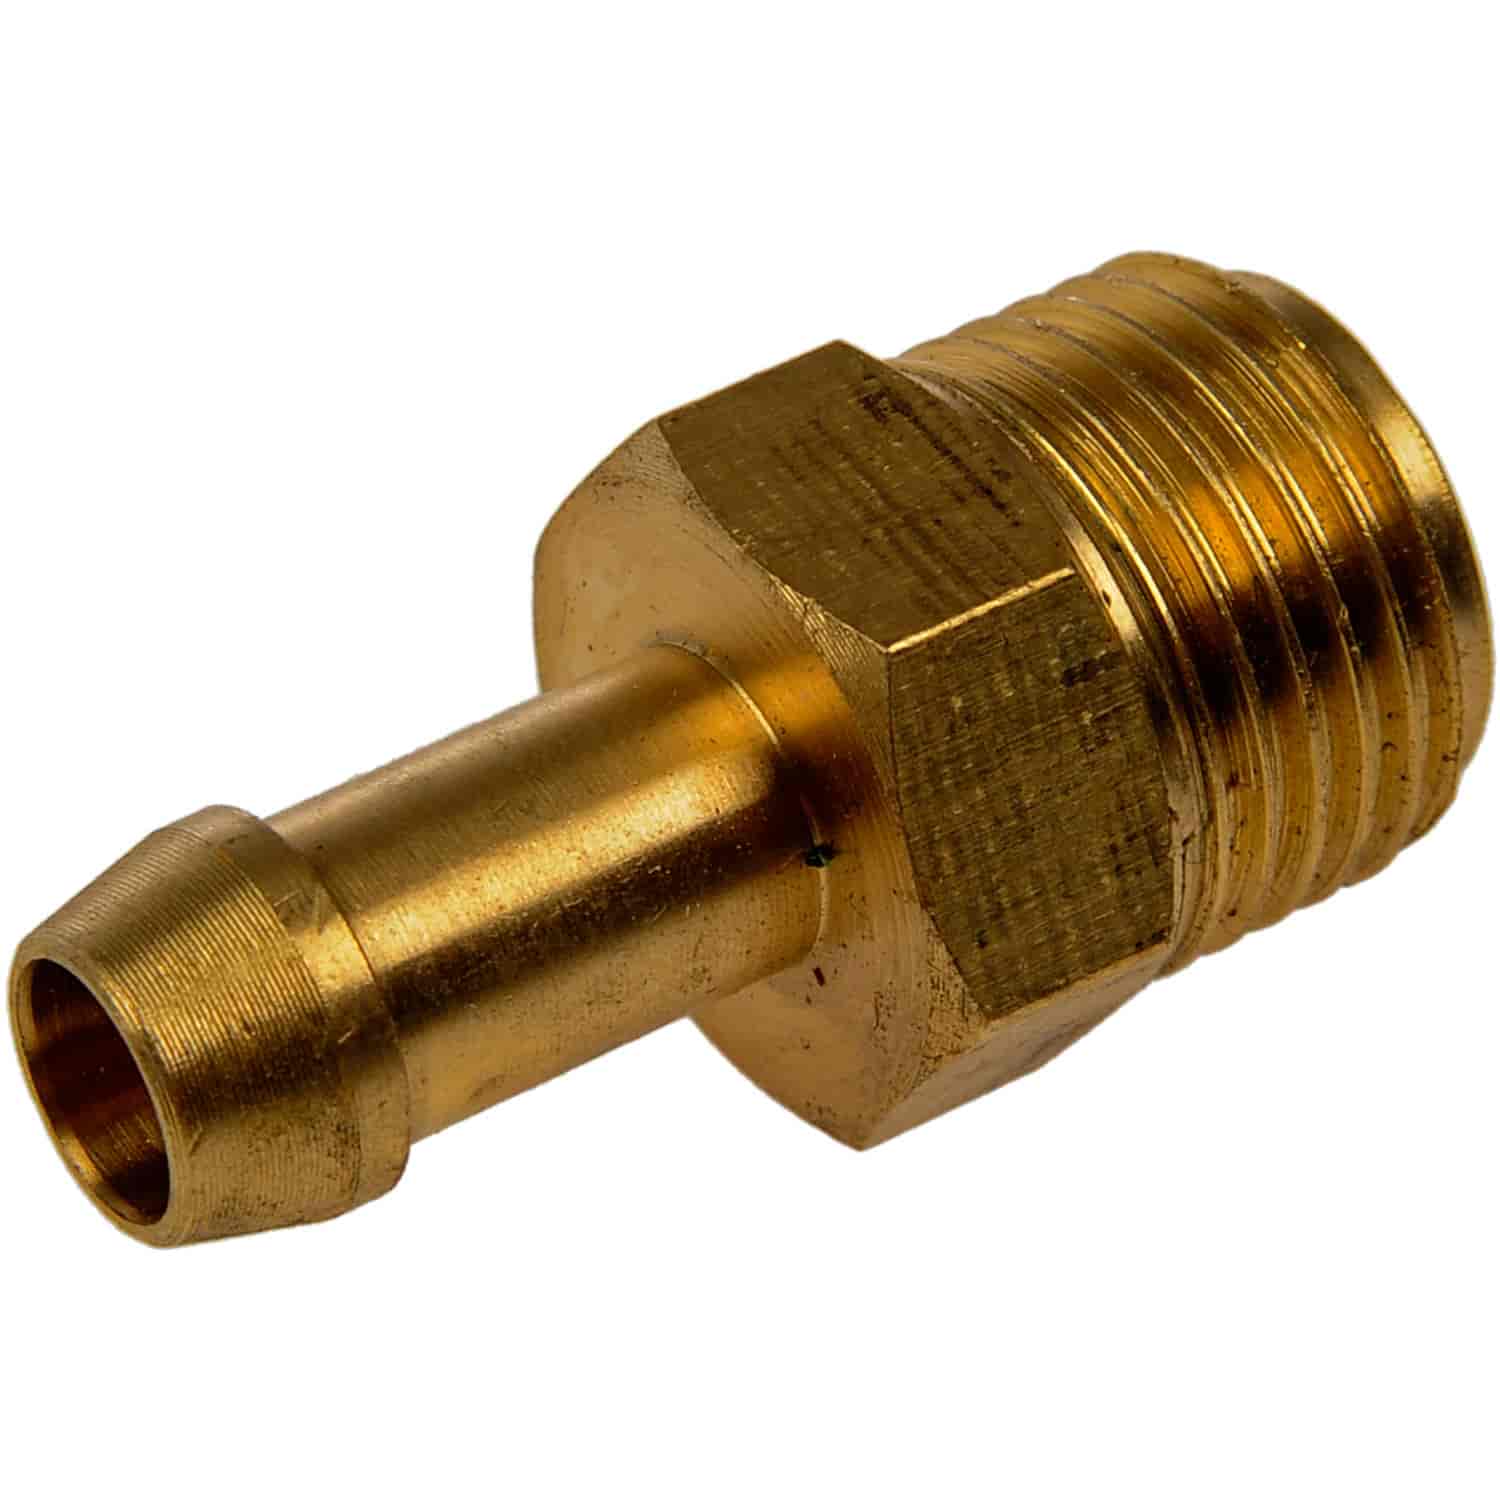 Fuel Hose Inverted Flare Fitting Male Connector 5/16" x 3/8" Tube